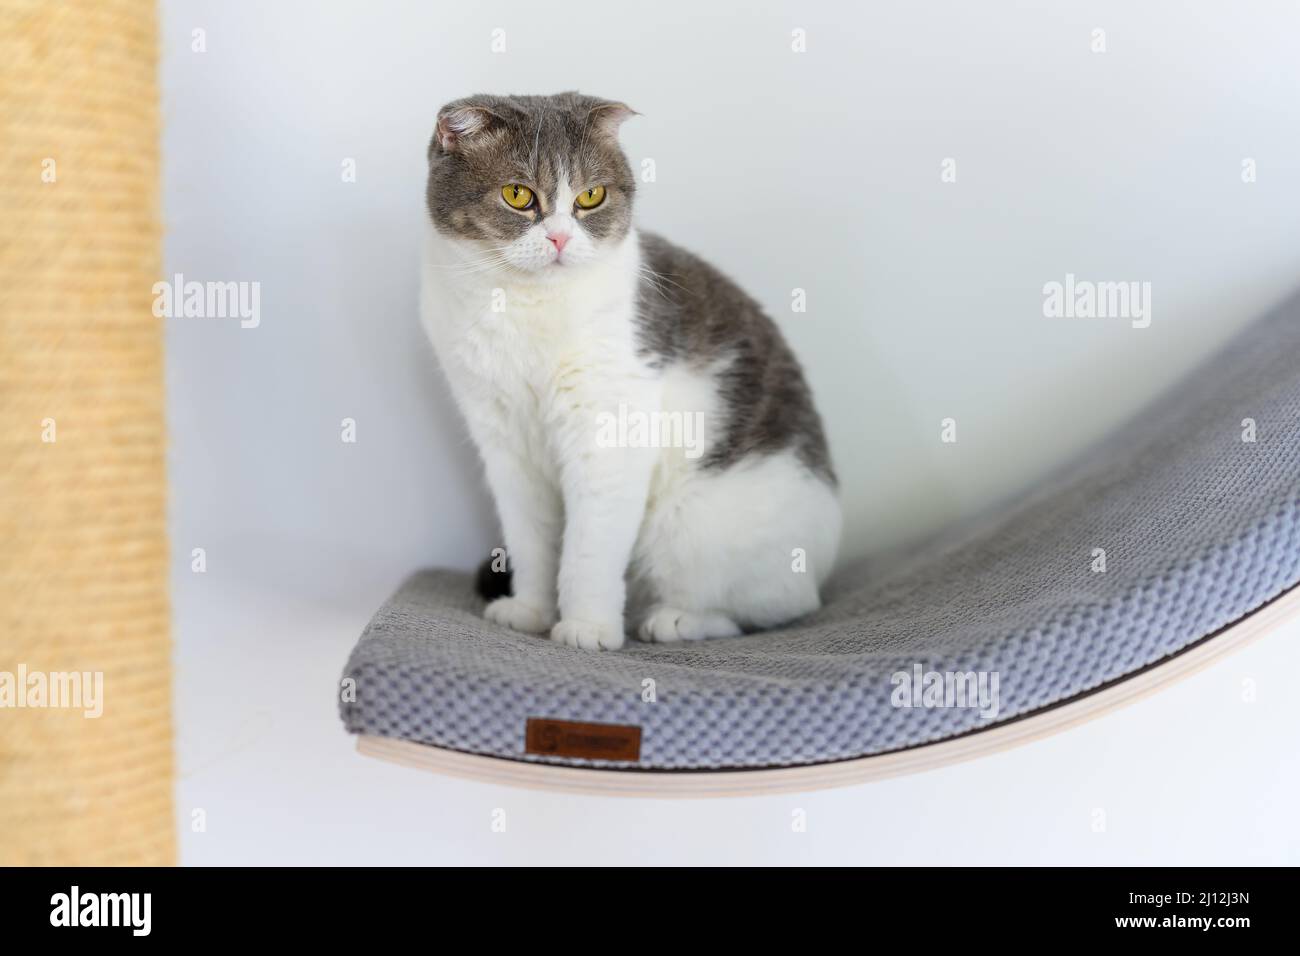 A cat sits on a curved shelf with blue soft cushions, a wall decoration shelf for a cat, a gray and white striped Scottish fold cat sits high, looking Stock Photo